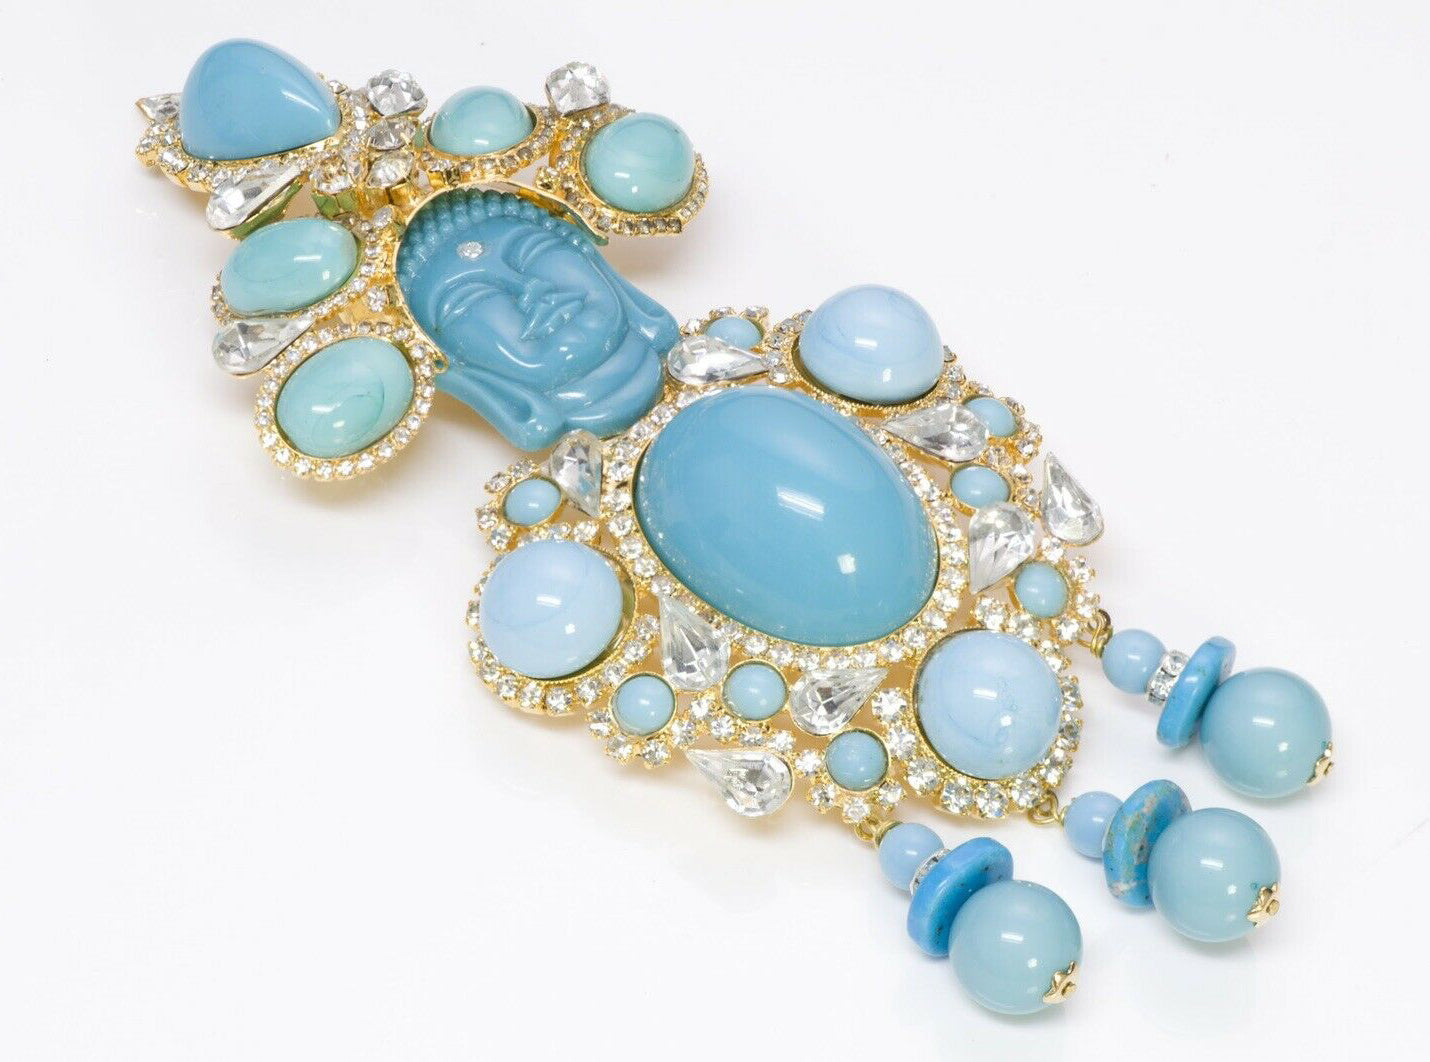 lawrence-vrba-buddha-faux-turquoise-crystal-brooch